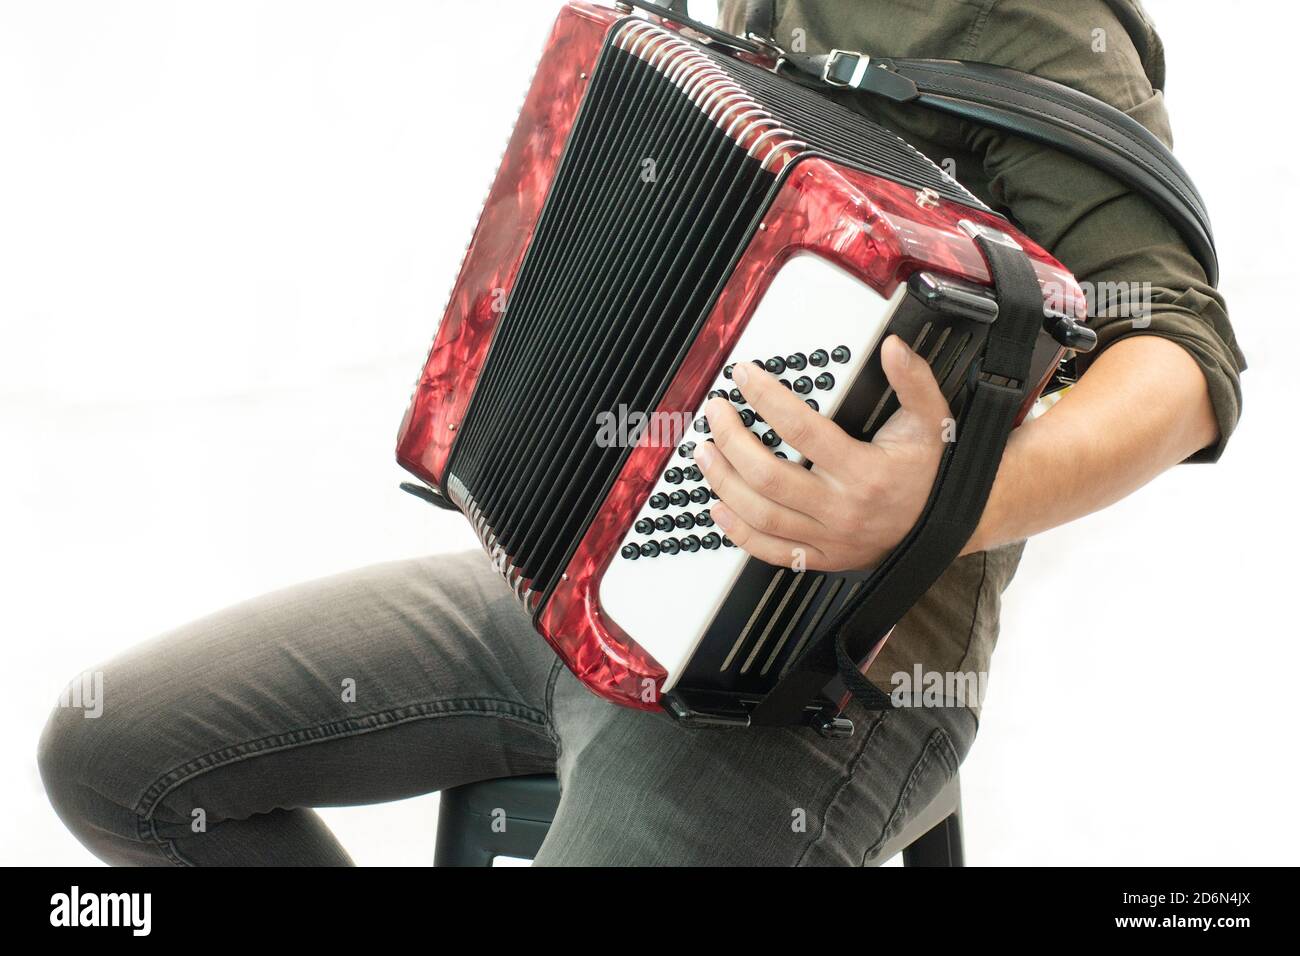 Closeup detail of a man in a black shirt playing the red accordion Hand close-up Stock Photo